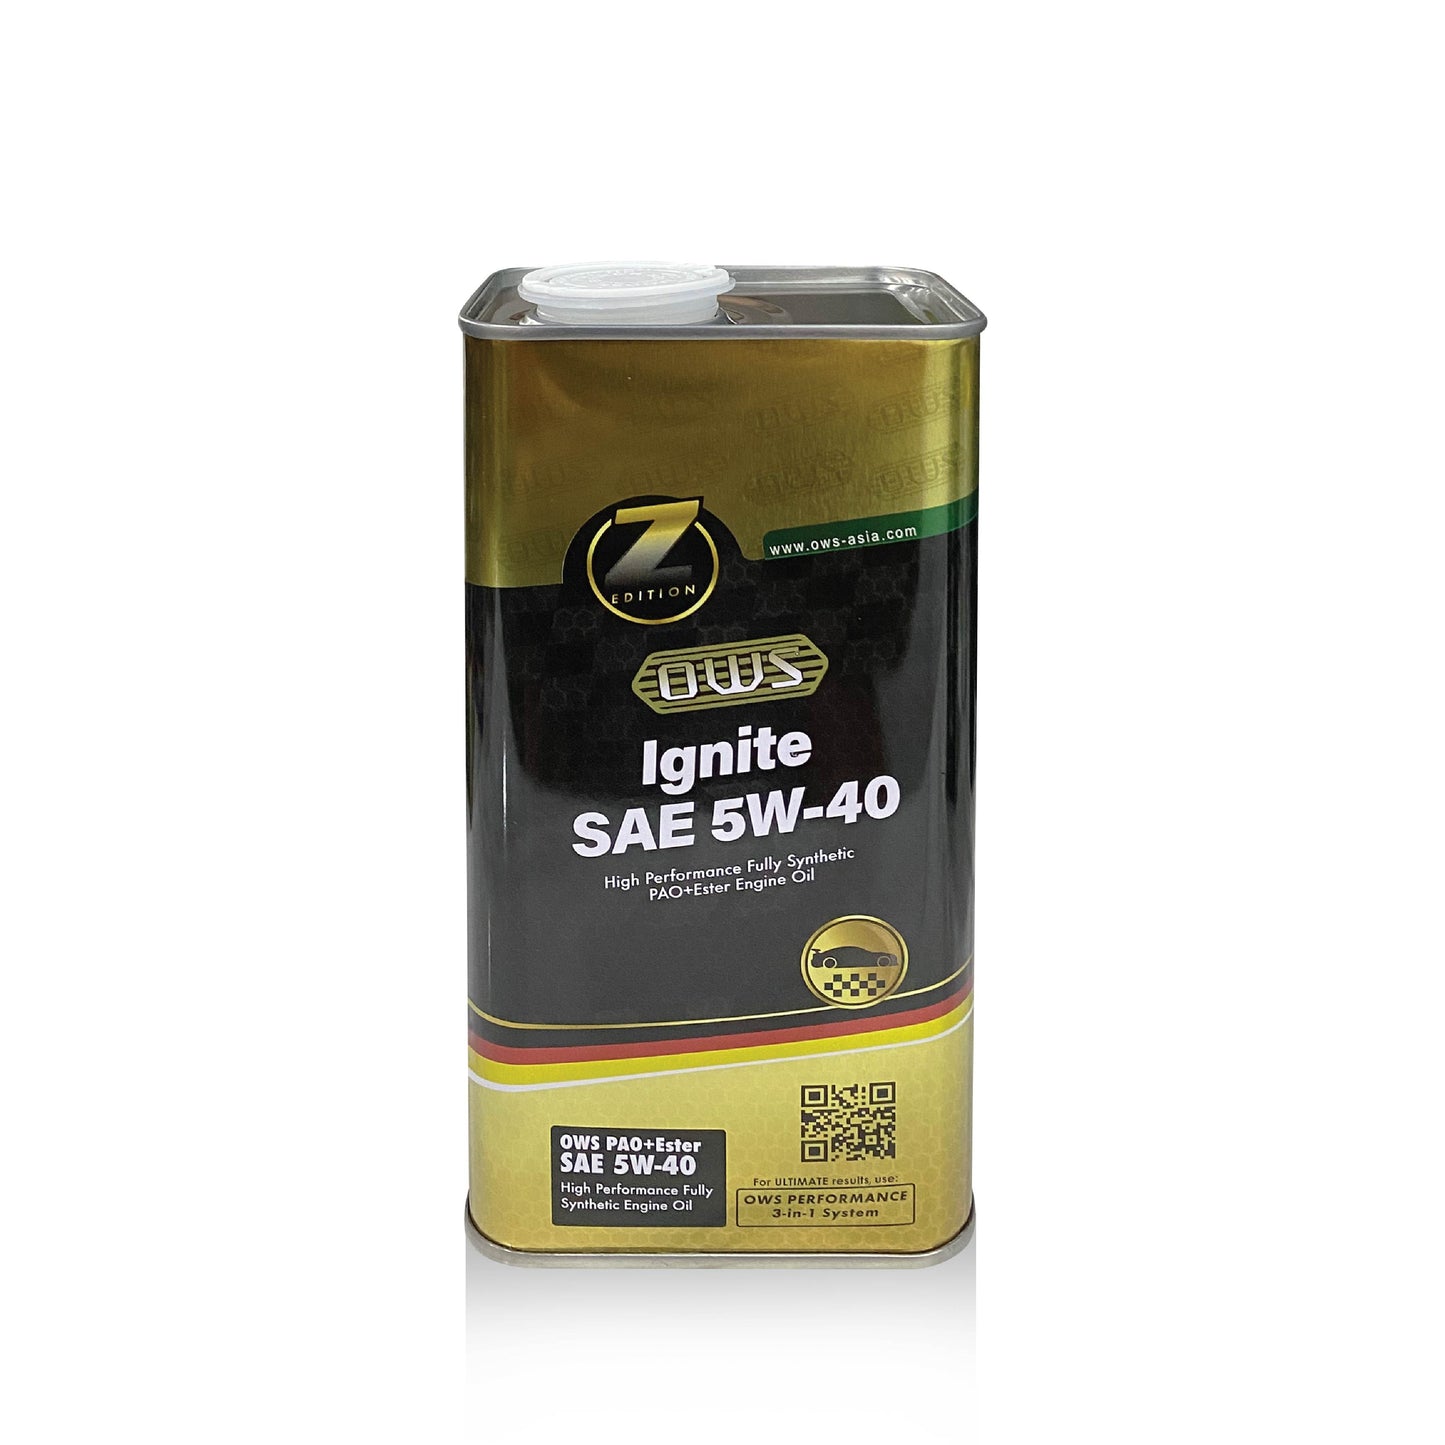 Ignite PAO+Ester High Performance Fully Synthetic Engine Oil 1L